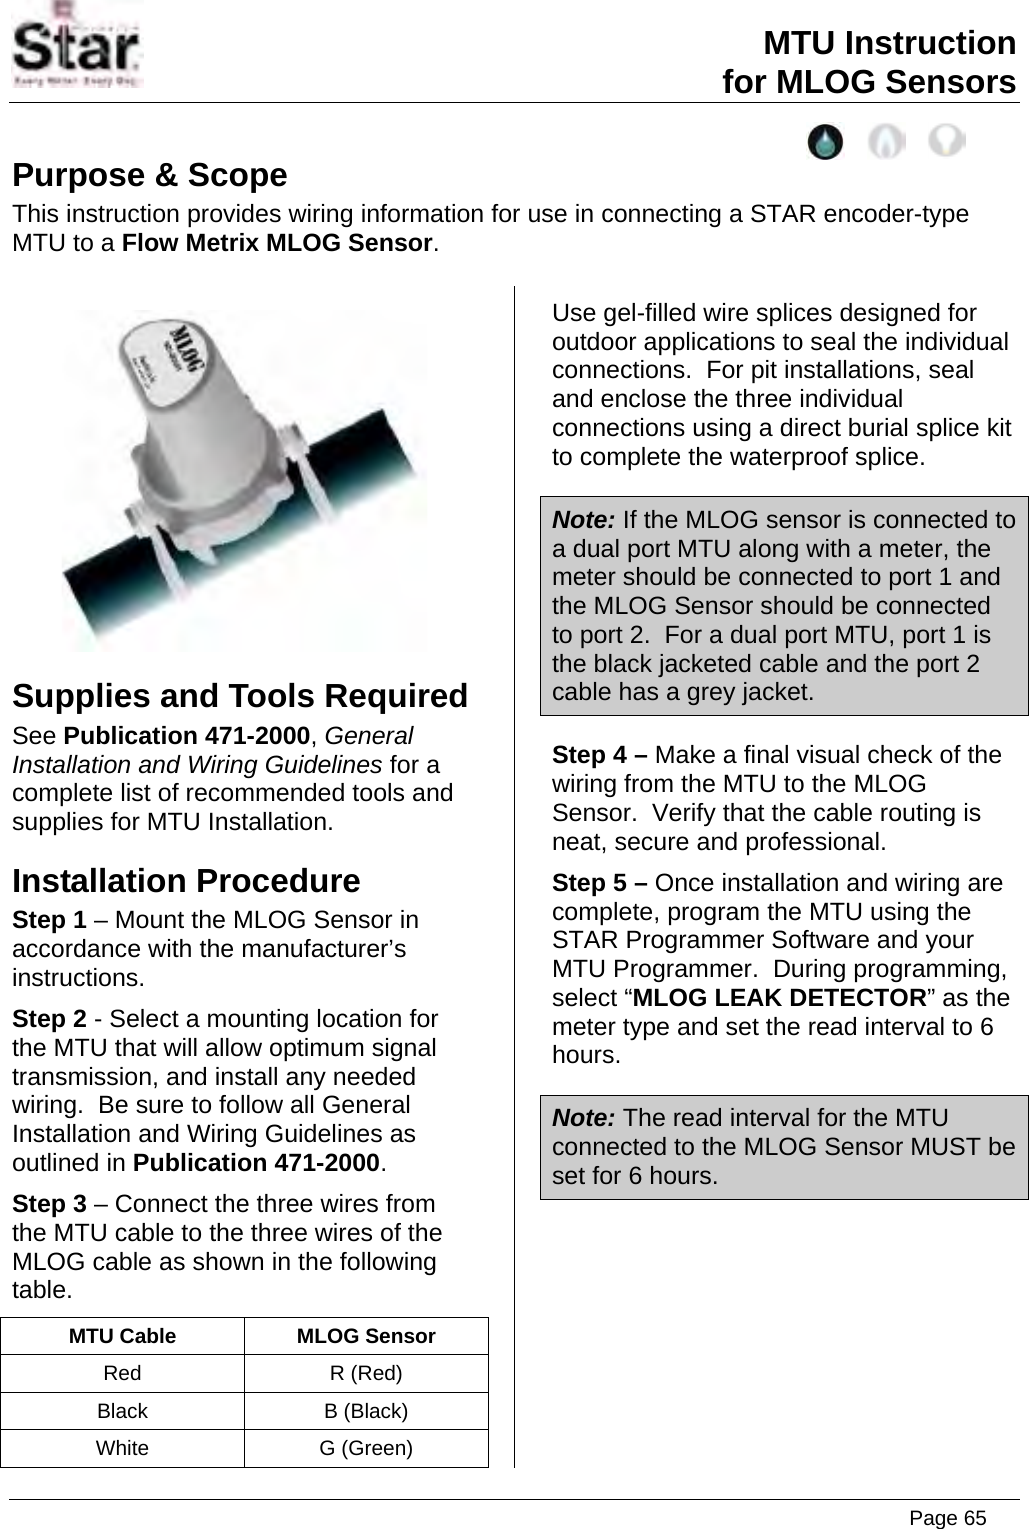 Page 65 of Aclara Technologies 09015 Transmitter for Meter Reading User Manual users manual